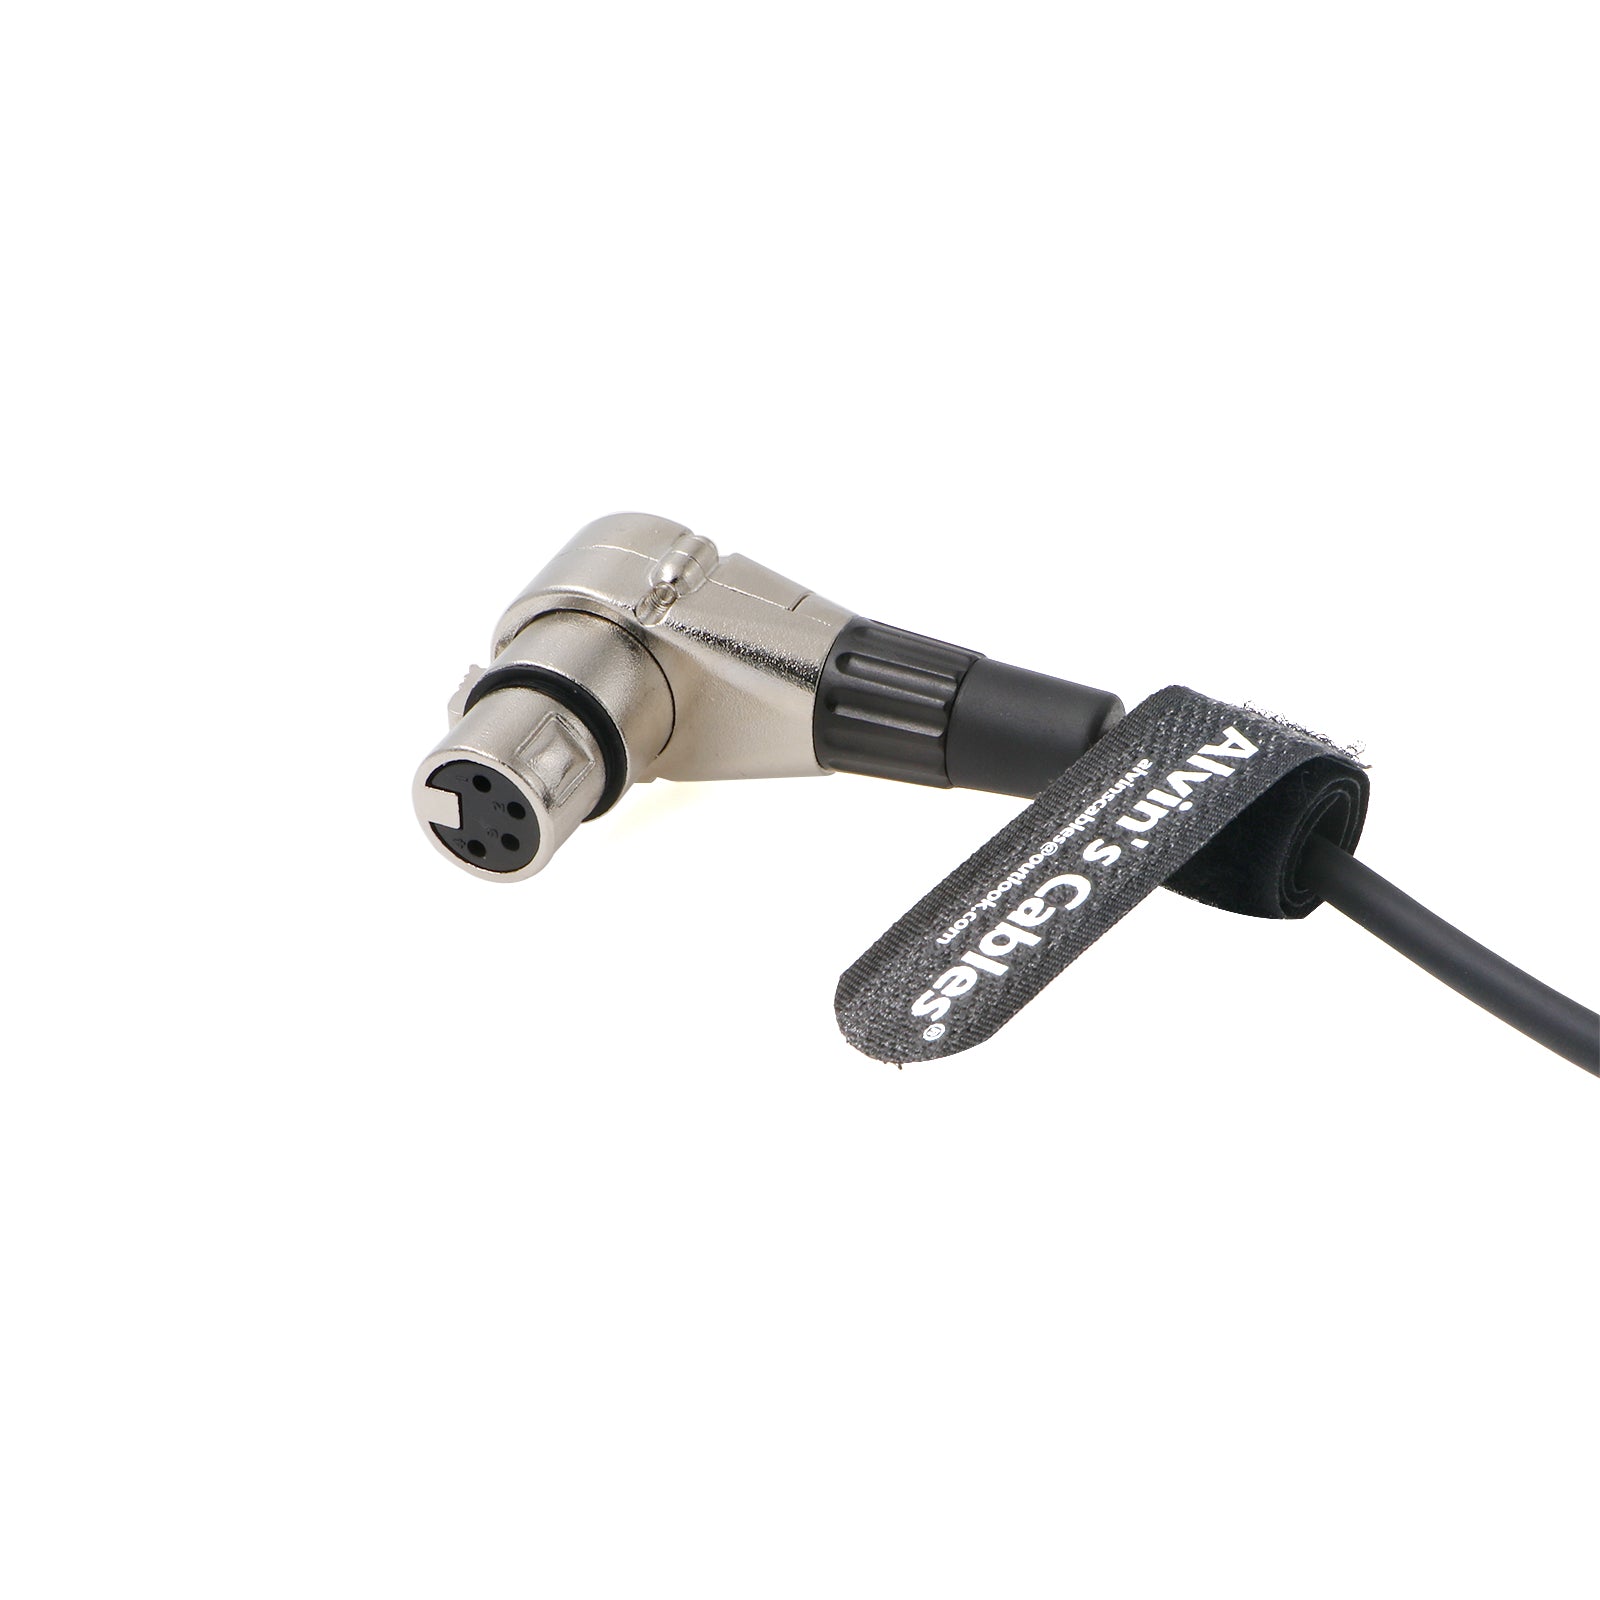 Power-Cable for BlackMagic-Ursa from Tiltamax-T6-Stabilizer 14.8V 4-Pin Male to XLR-4-Pin Female Alvin's Cables